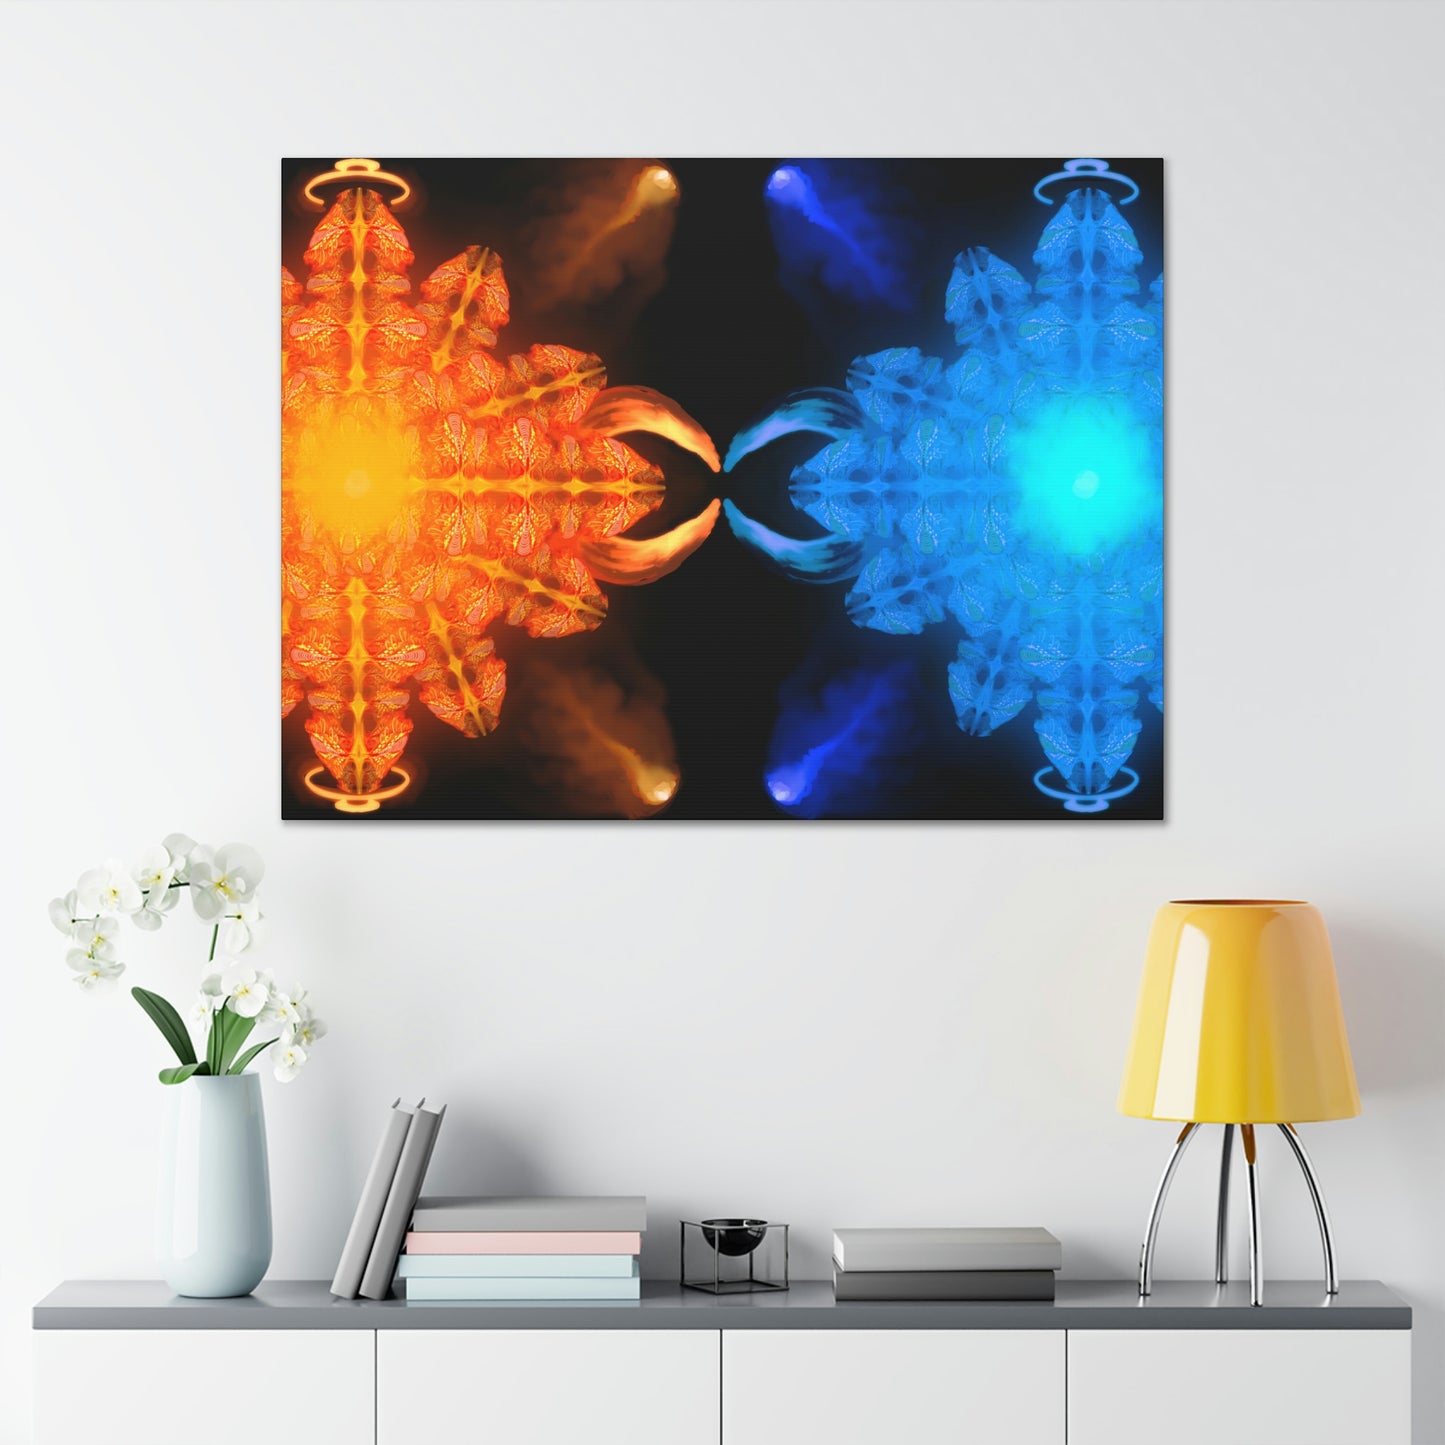 Fire & Ice on Stretched Canvas